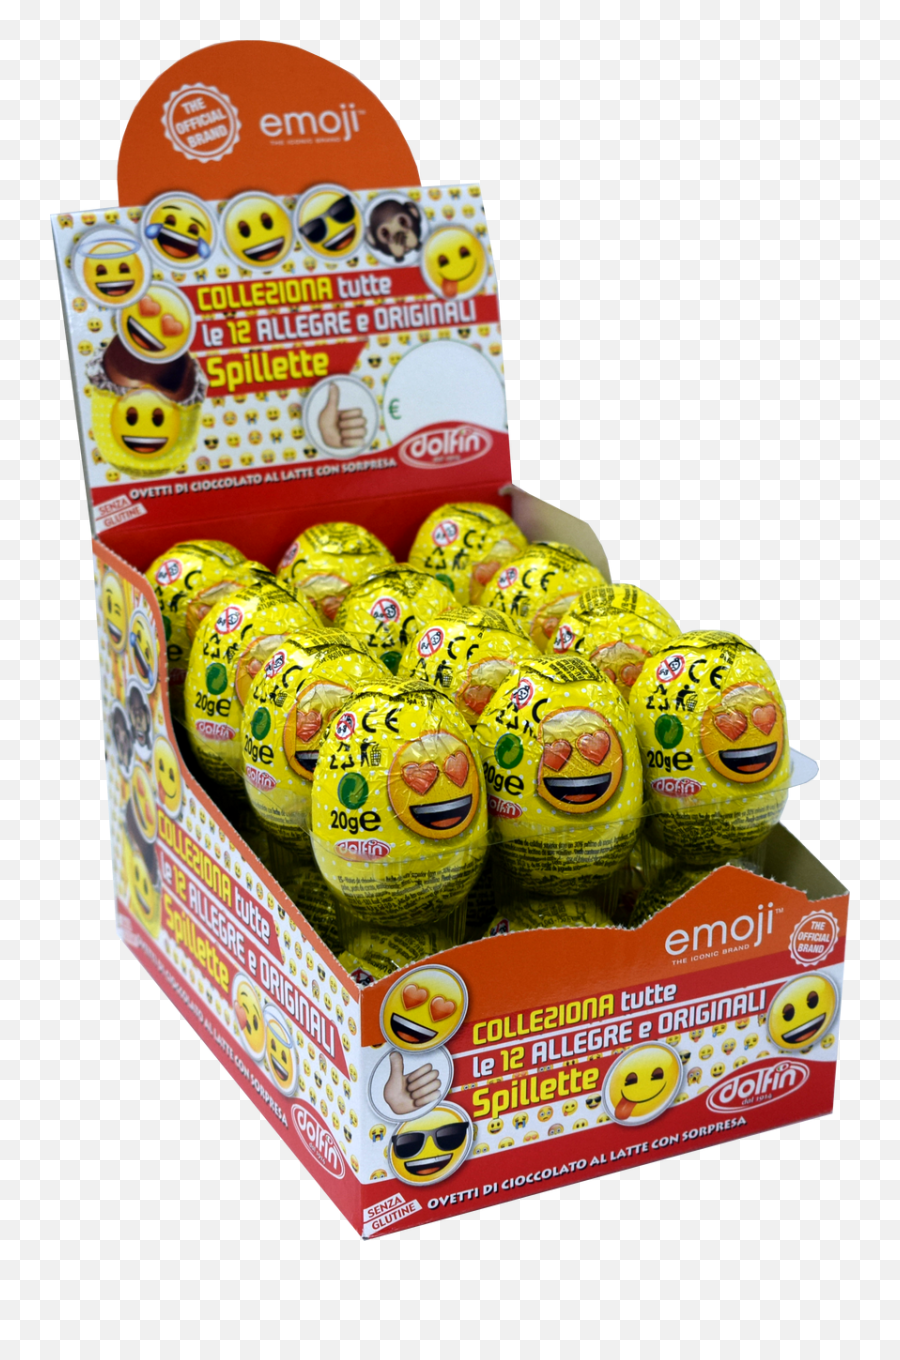 Character License Products - Candy Castle Crew Soft Emoji,Lol Surprise Emojis